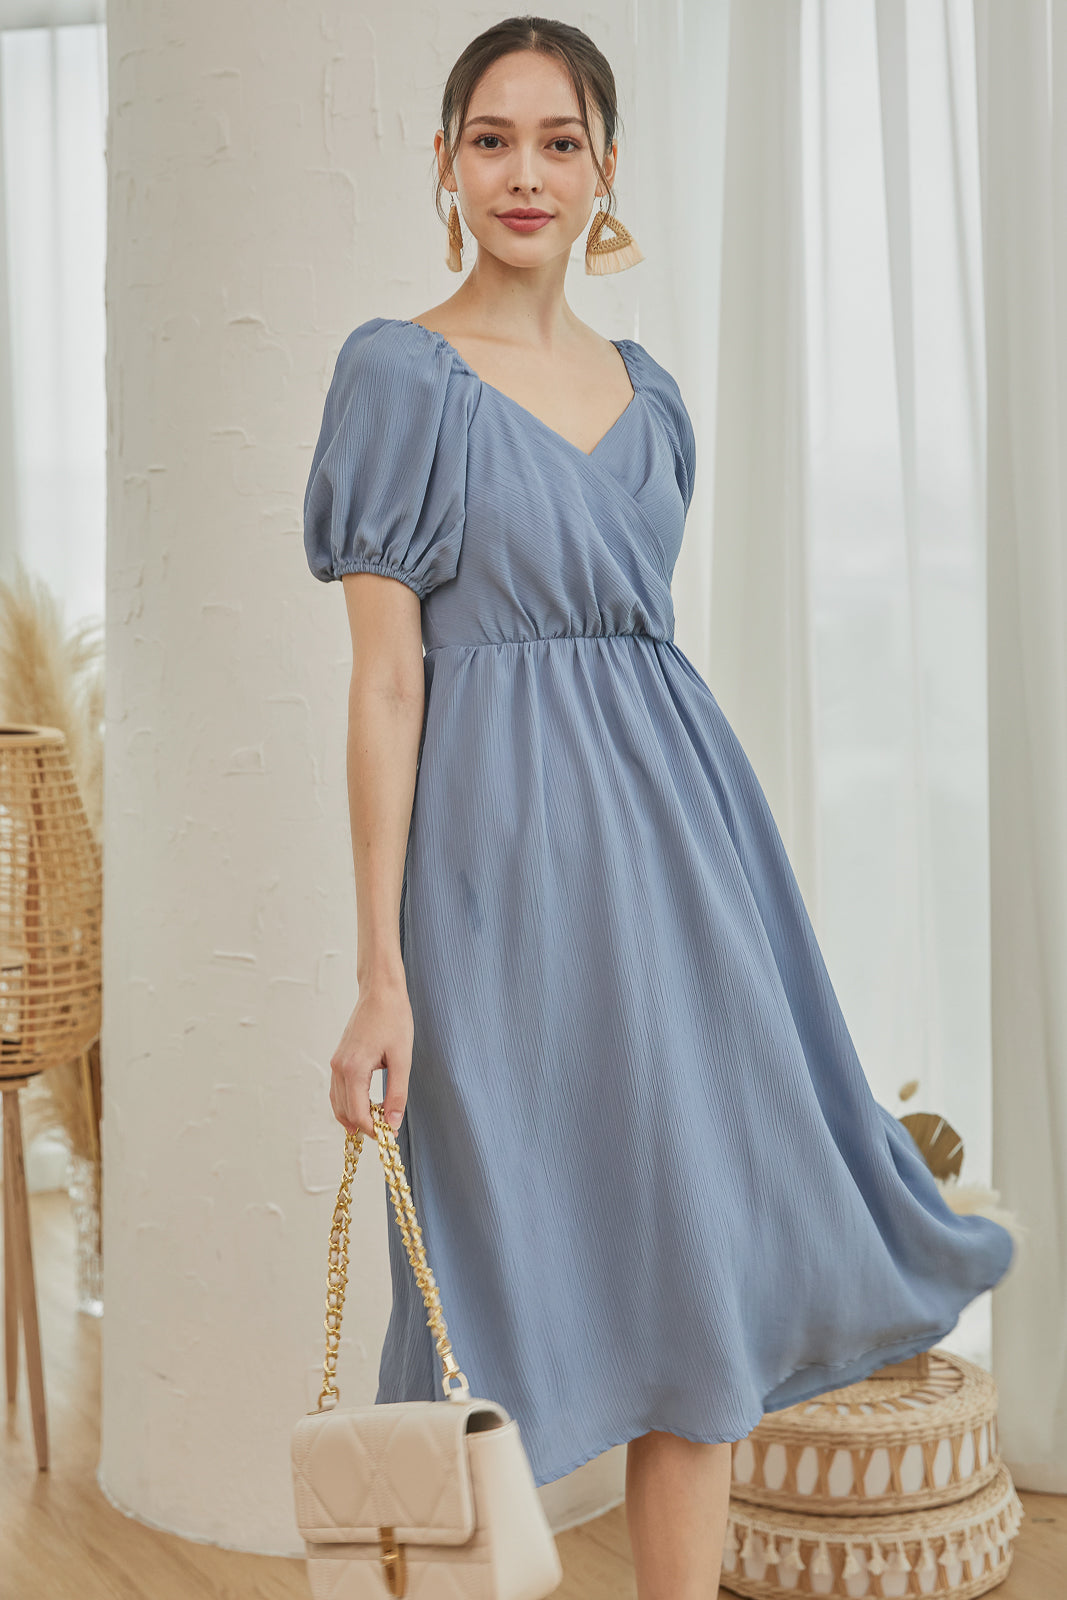 Encounter Crepe Textured Wrap Dress in Periwinkle